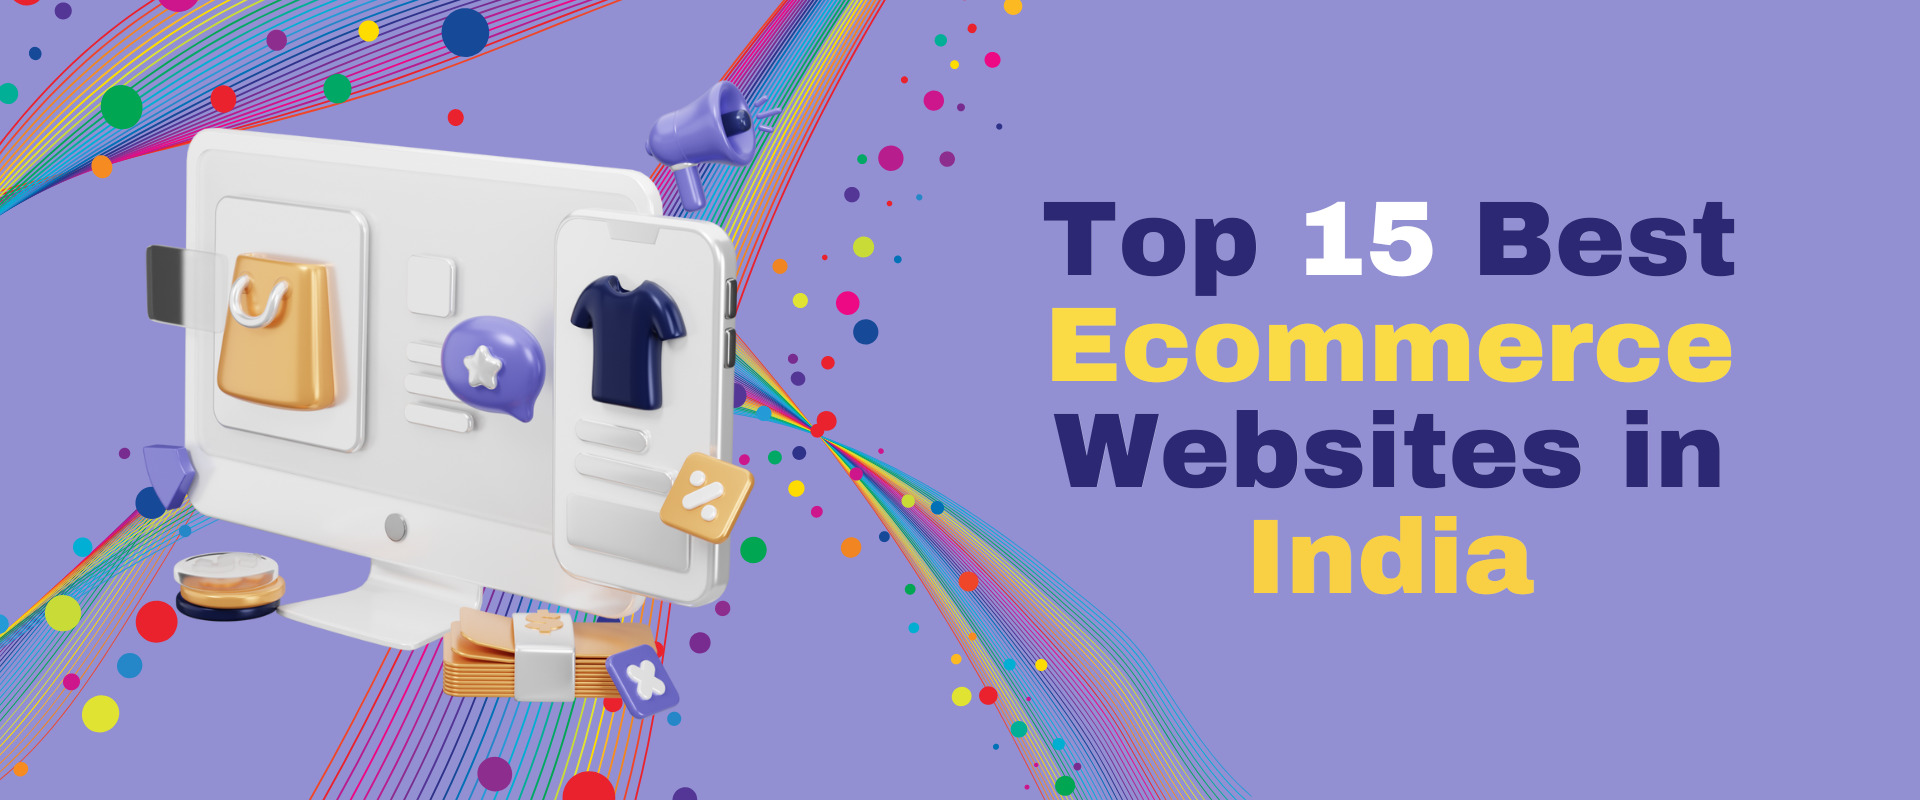 Top 15 Best Ecommerce Sites in India